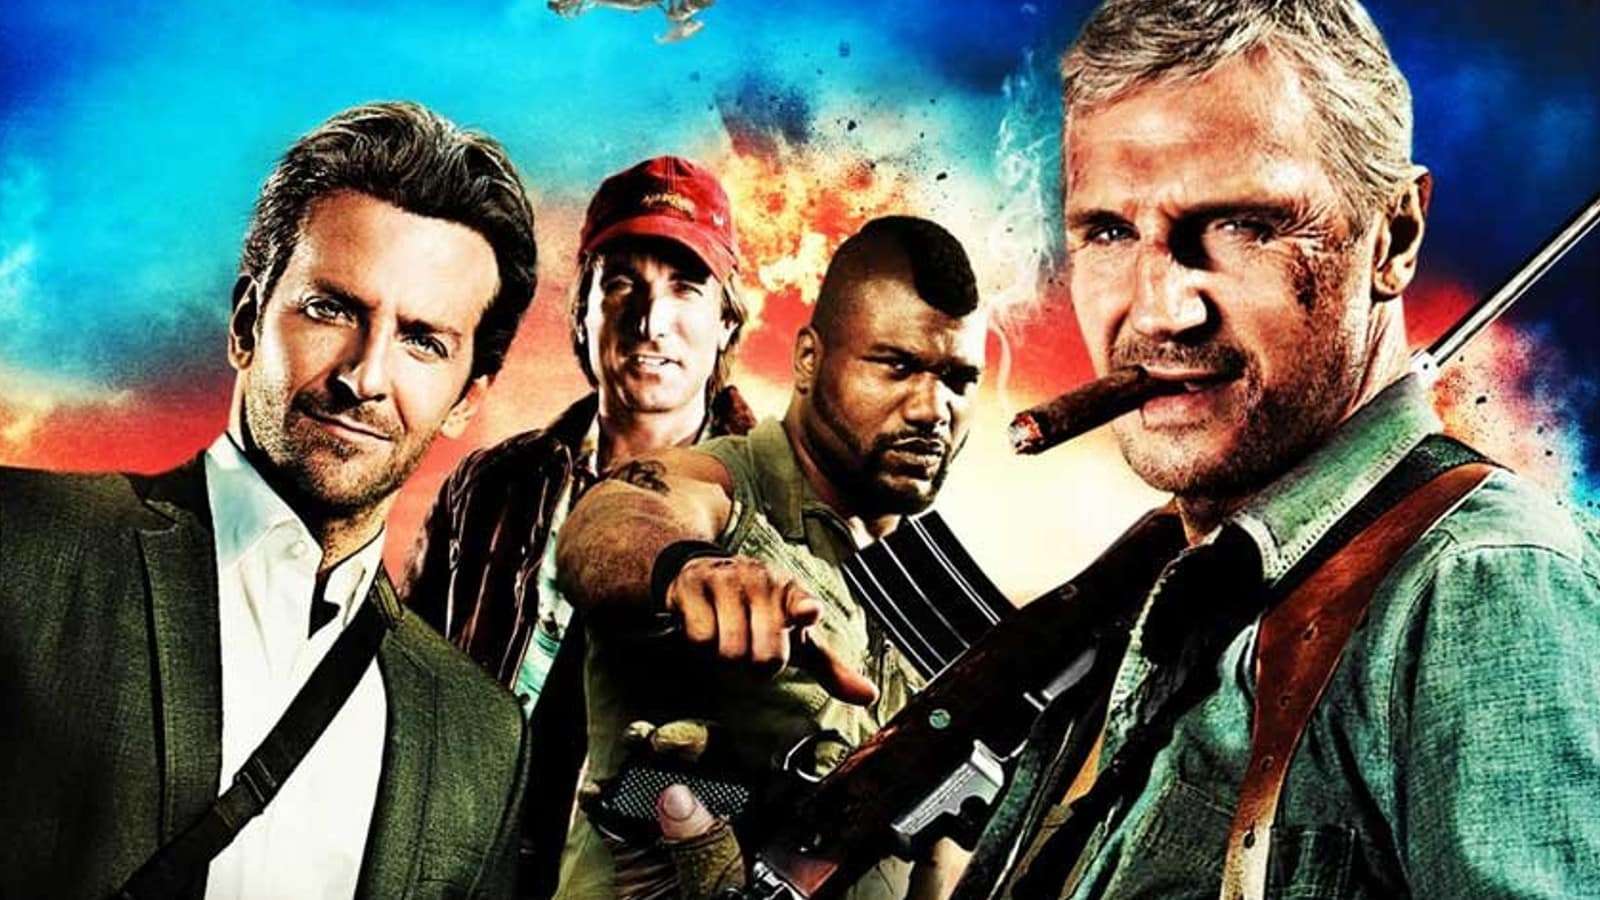 Bradley Cooper, Sharlto Copley, Quinton 'Ramage' Jackson and Liam Neeson in 2010's The A-Team